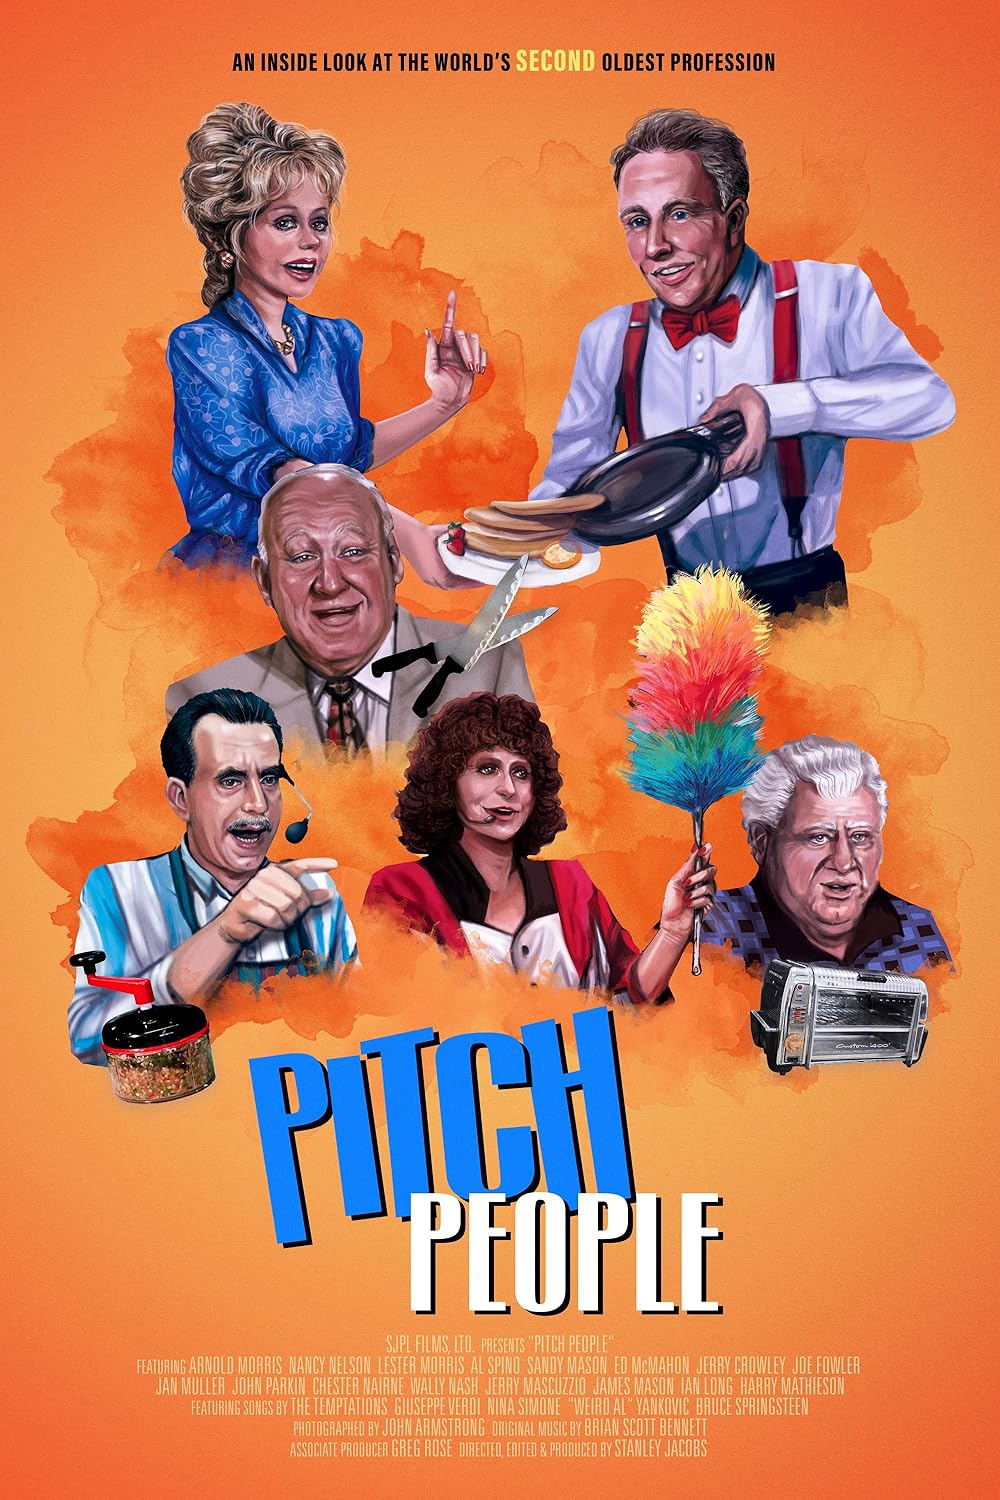 The Return of Pitch People